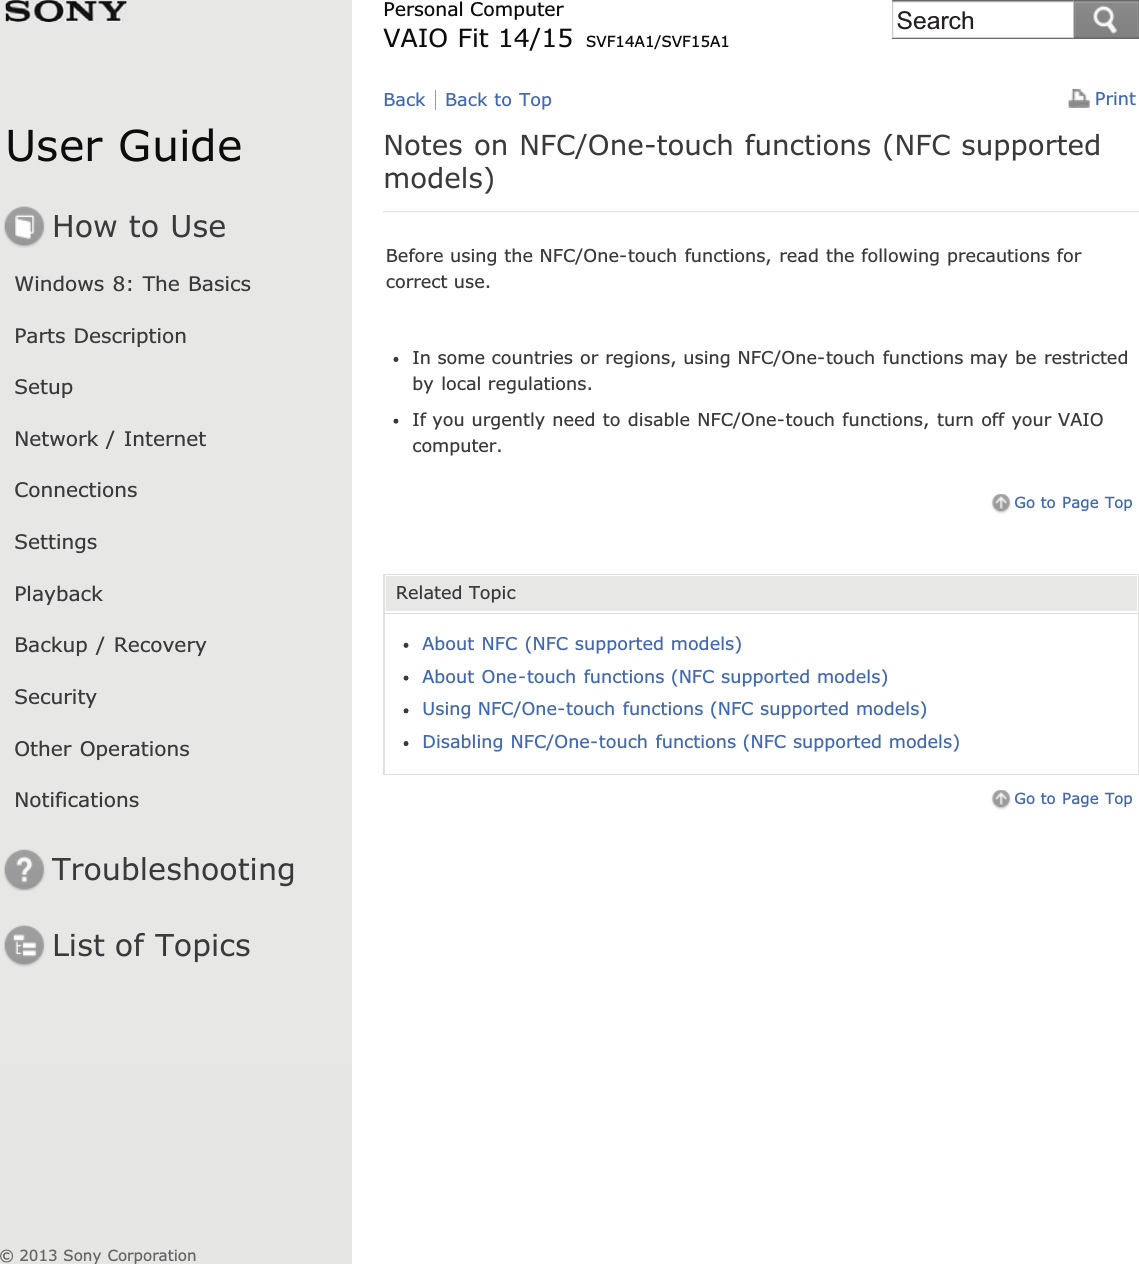 User GuideHow to UseWindows 8: The BasicsParts DescriptionSetupNetwork / InternetConnectionsSettingsPlaybackBackup / RecoverySecurityOther OperationsNotificationsTroubleshootingList of TopicsPrintPersonal ComputerVAIO Fit 14/15 SVF14A1/SVF15A1Notes on NFC/One-touch functions (NFC supportedmodels)Before using the NFC/One-touch functions, read the following precautions forcorrect use.In some countries or regions, using NFC/One-touch functions may be restrictedby local regulations.If you urgently need to disable NFC/One-touch functions, turn off your VAIOcomputer.Go to Page TopRelated TopicAbout NFC (NFC supported models)About One-touch functions (NFC supported models)Using NFC/One-touch functions (NFC supported models)Disabling NFC/One-touch functions (NFC supported models)Go to Page TopBack Back to Top© 2013 Sony CorporationSearch